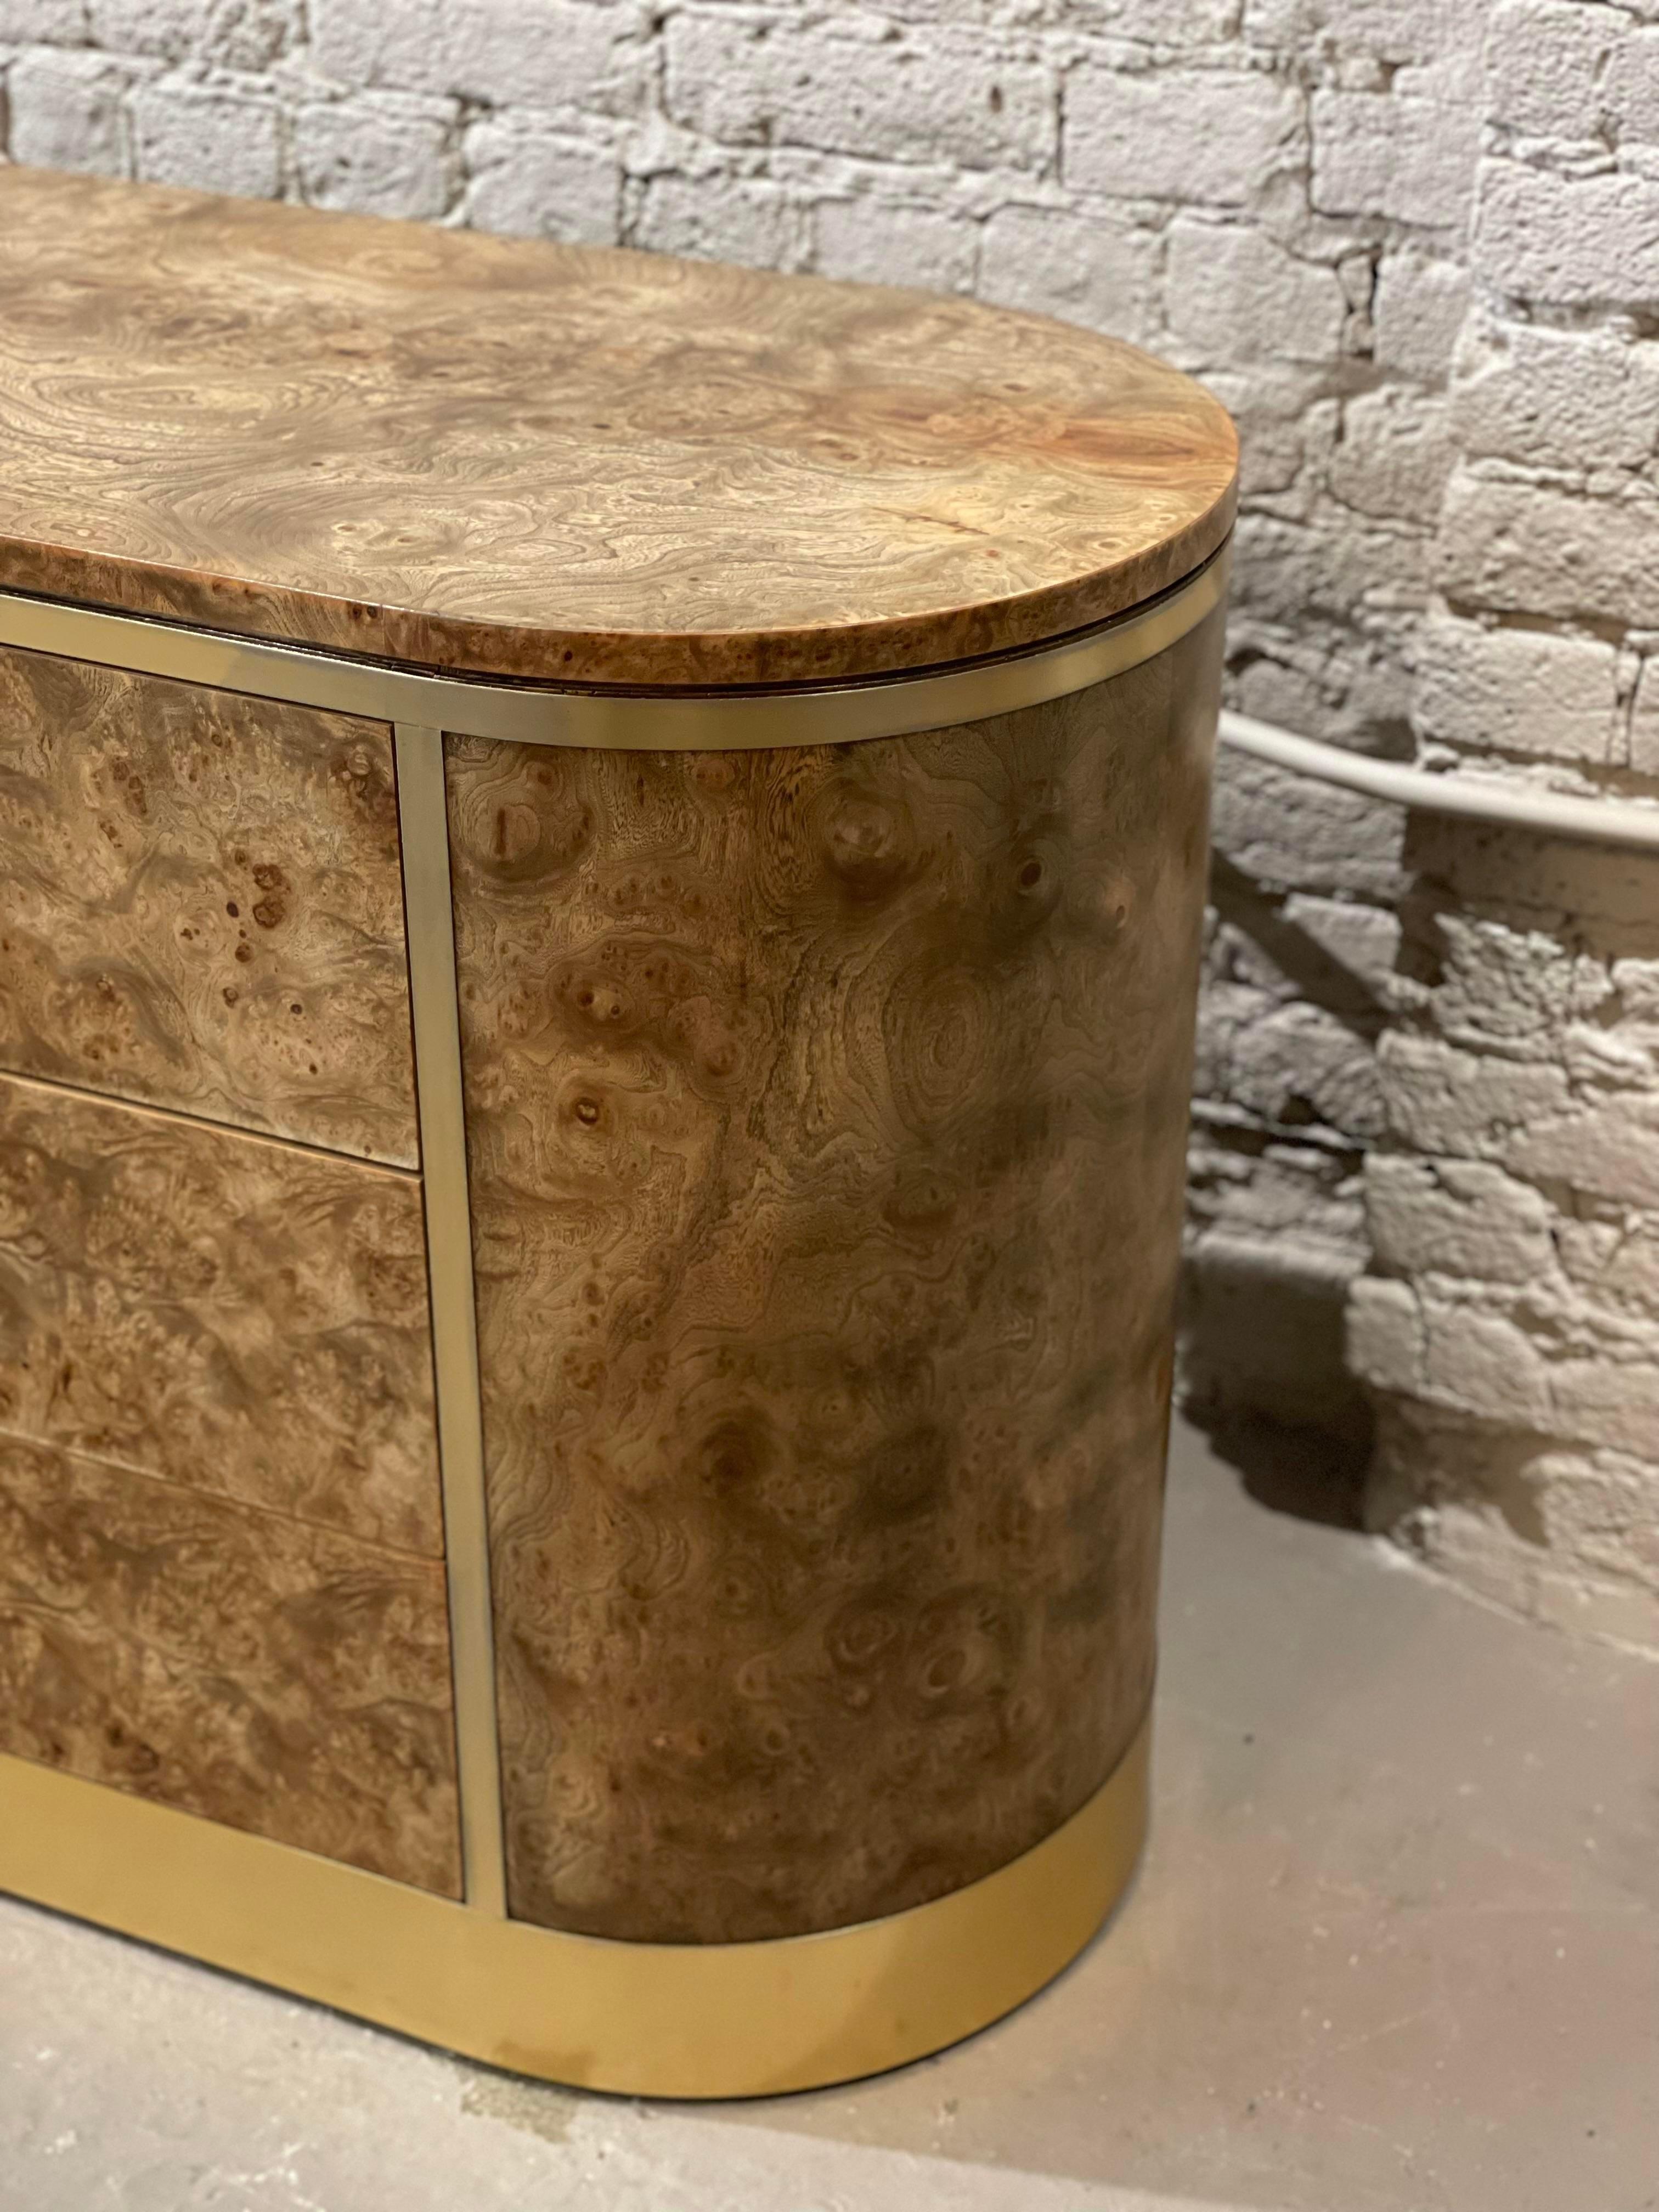 Oh I don’t want to sell this!! We sanded it down to see what was underneath the original polyurethane coating. It was the most beautiful natural color of Burled Wood. We simply put a matte sealant on it, polished up the brass and here it is!!